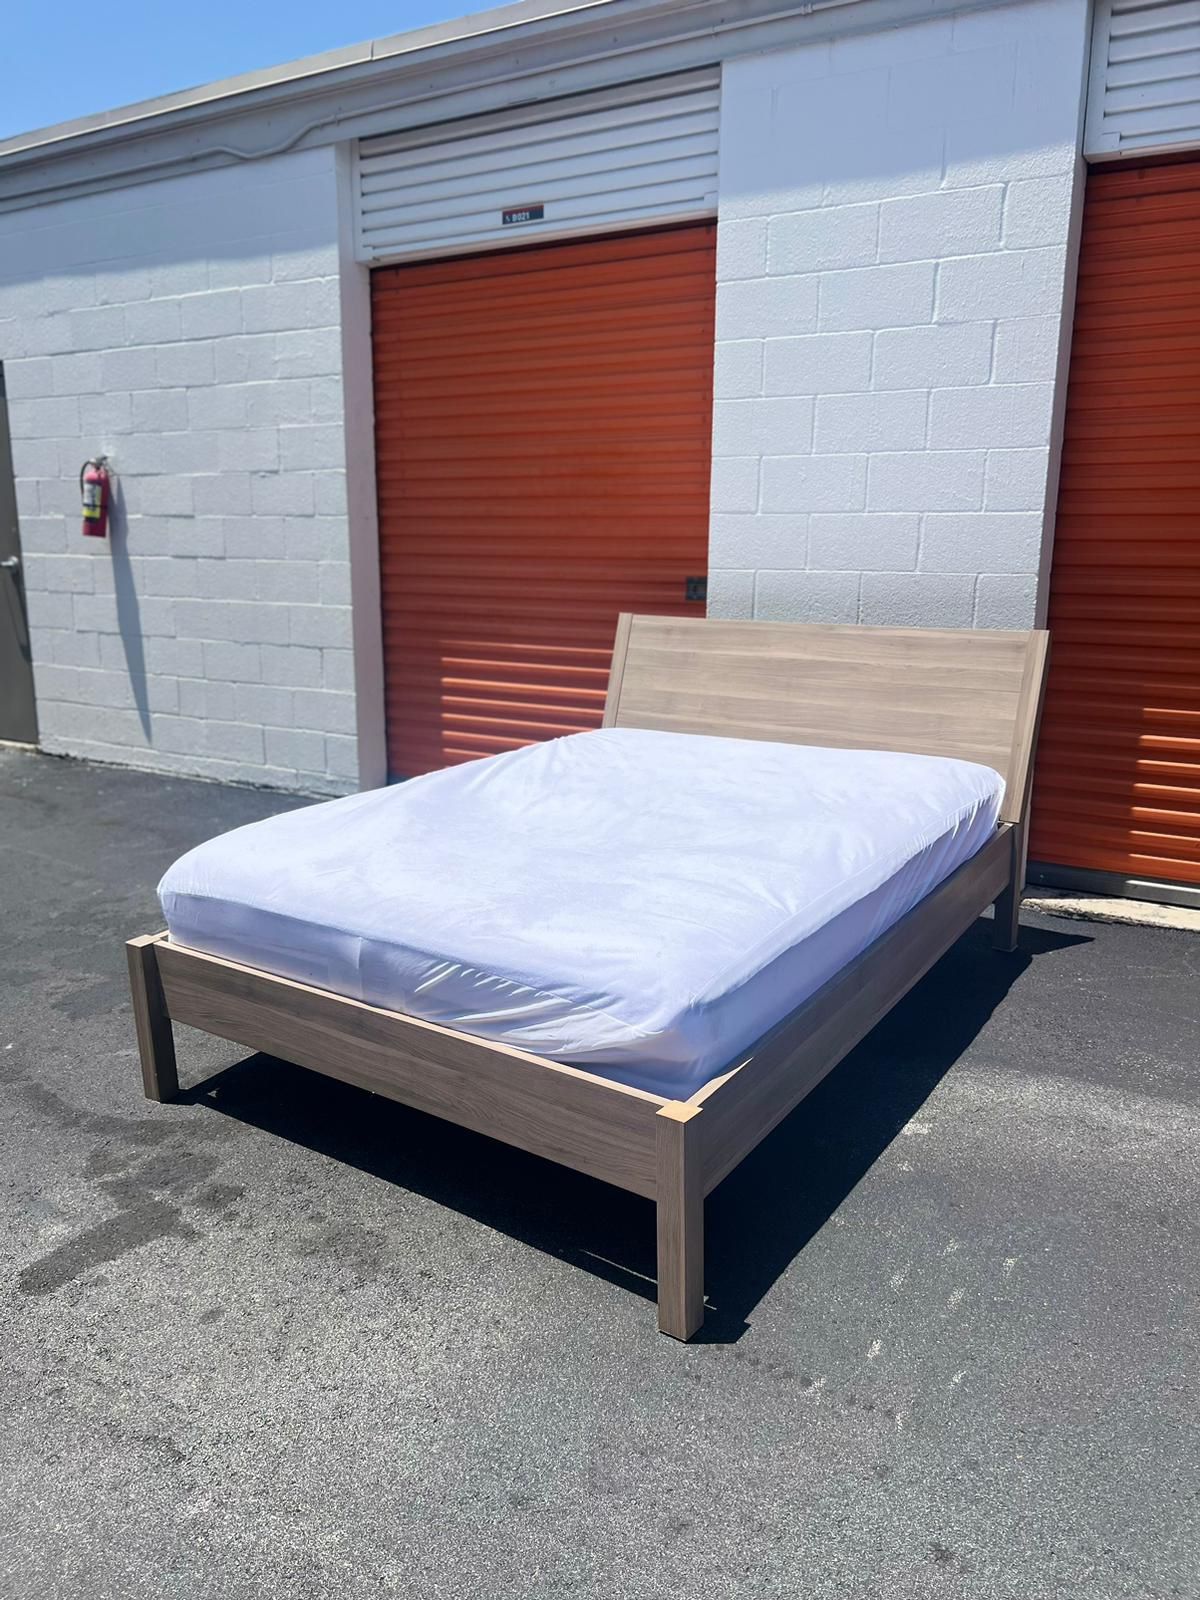 Queen Size Bed Frame + Mattress / Great Condition / Delivery Service (NEGOTIABLE)